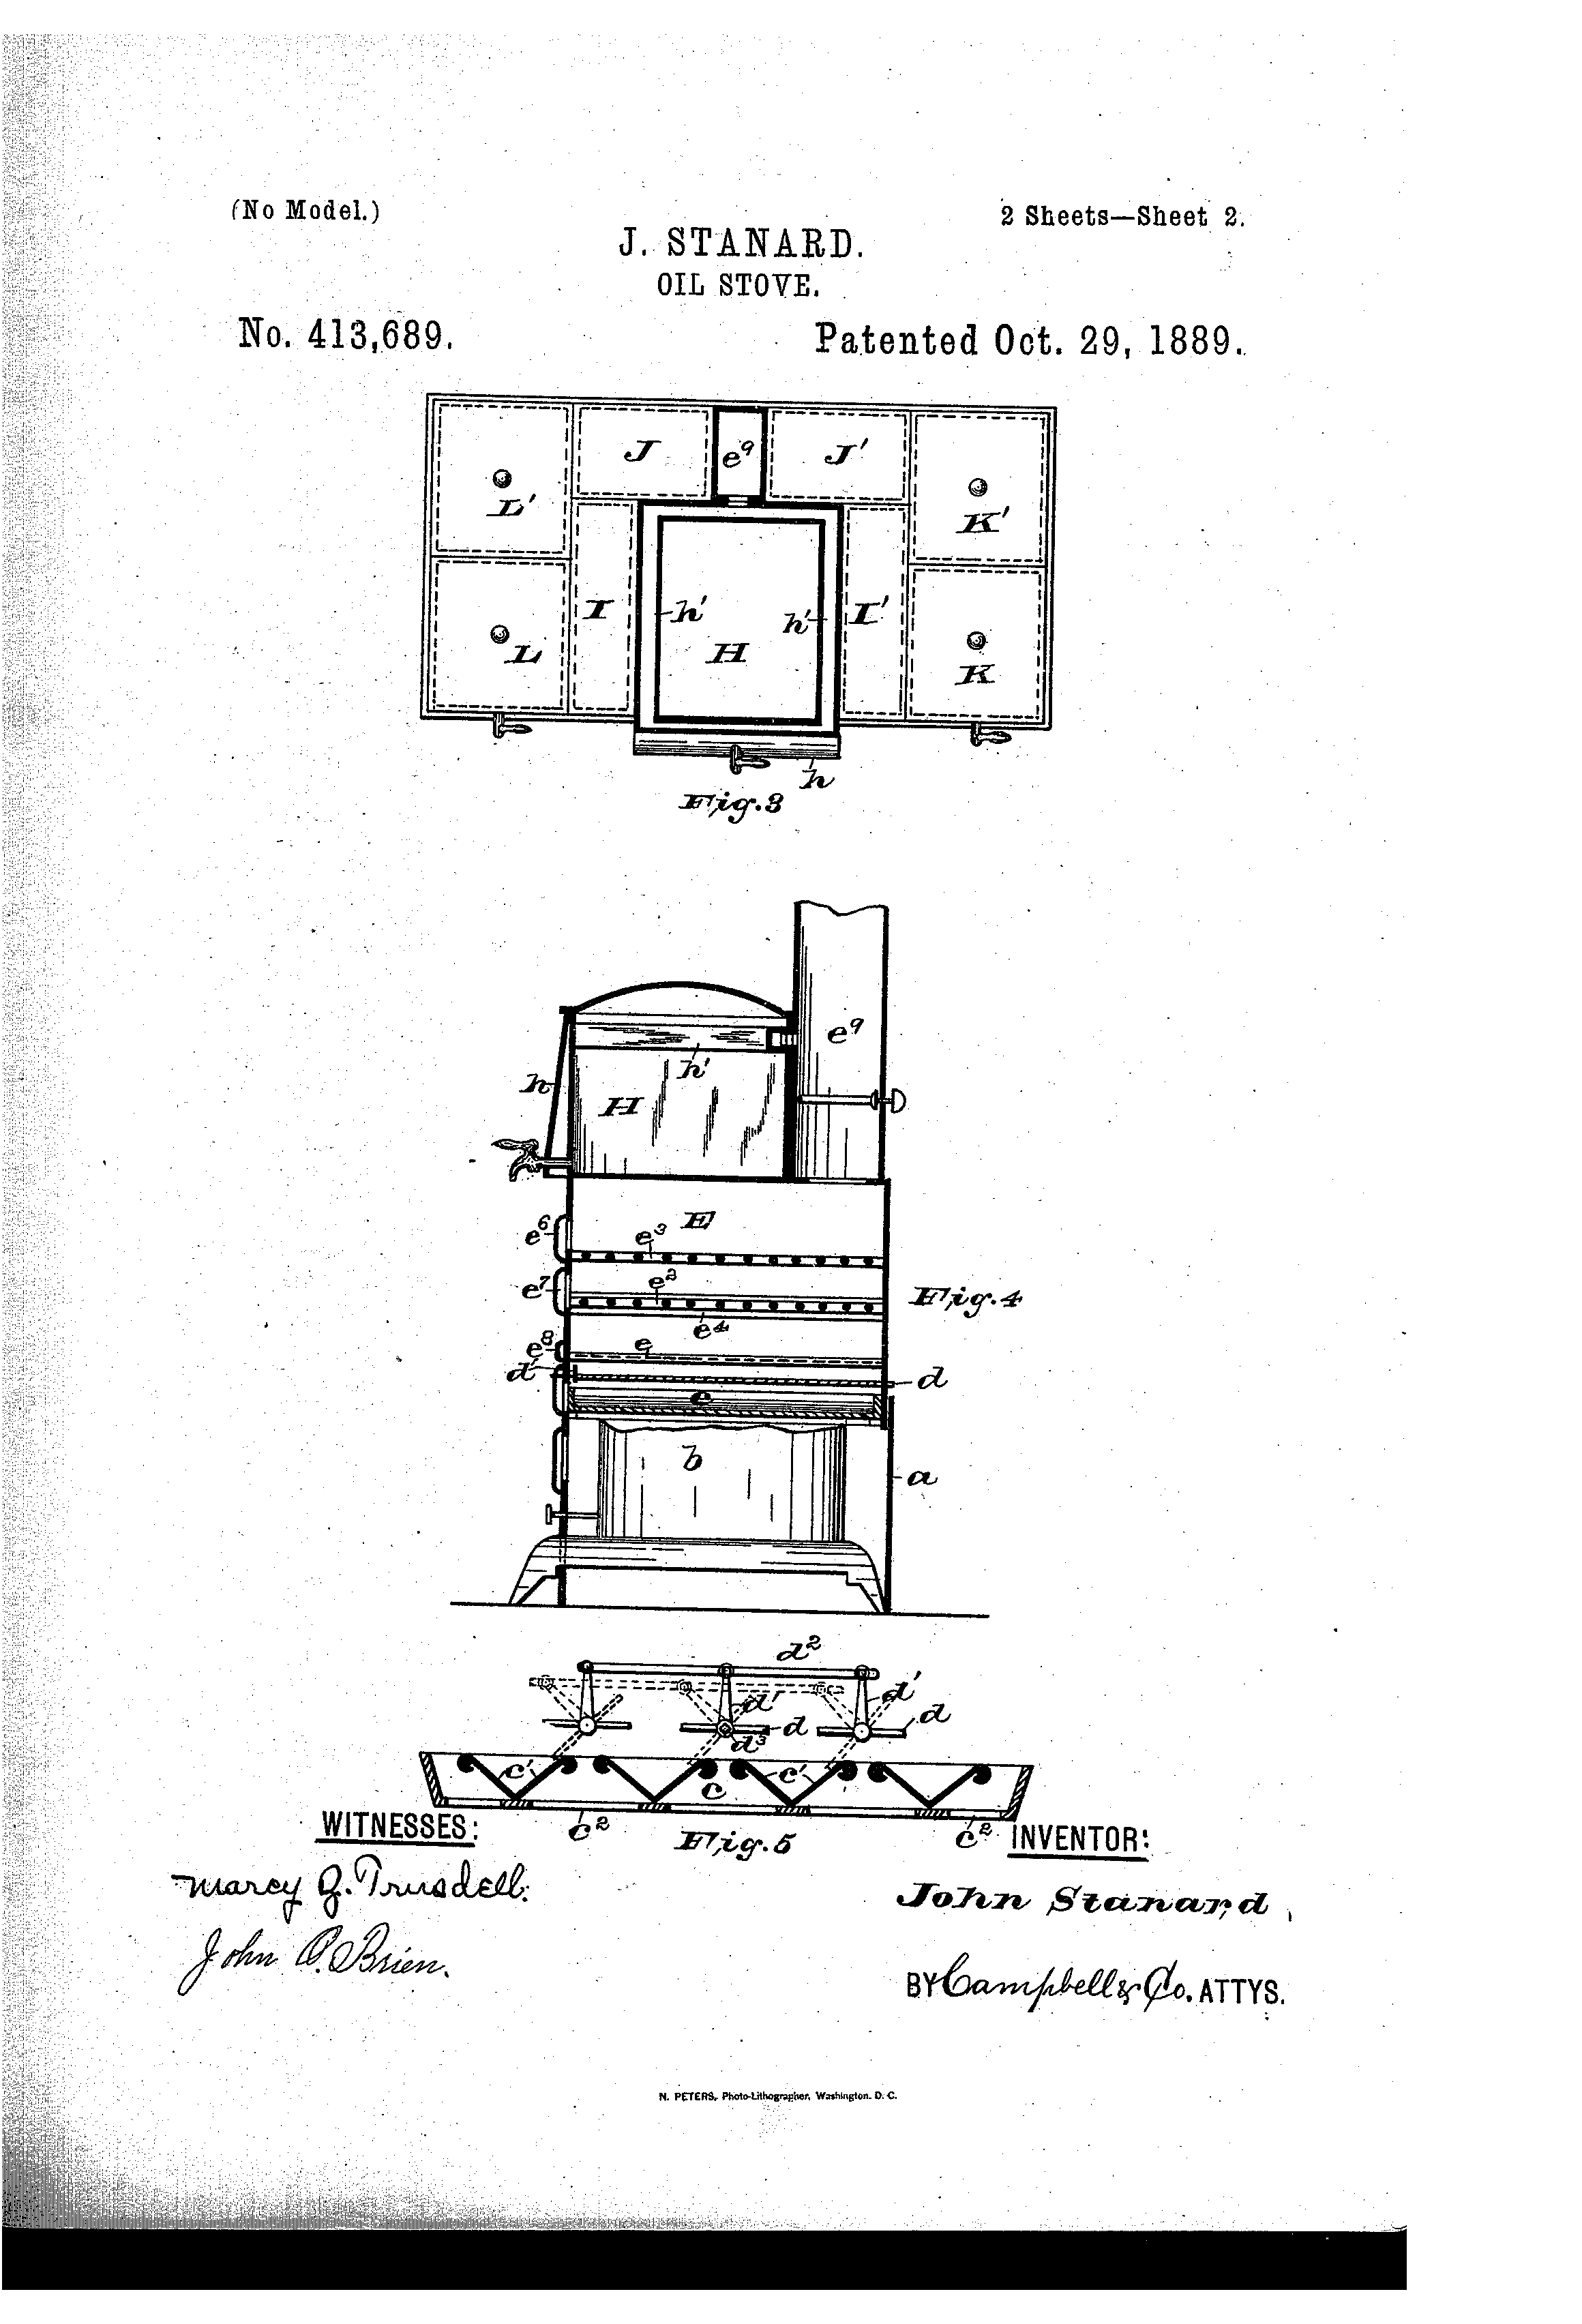 Patent Illustration of Stanard's Oil Stove, view 2